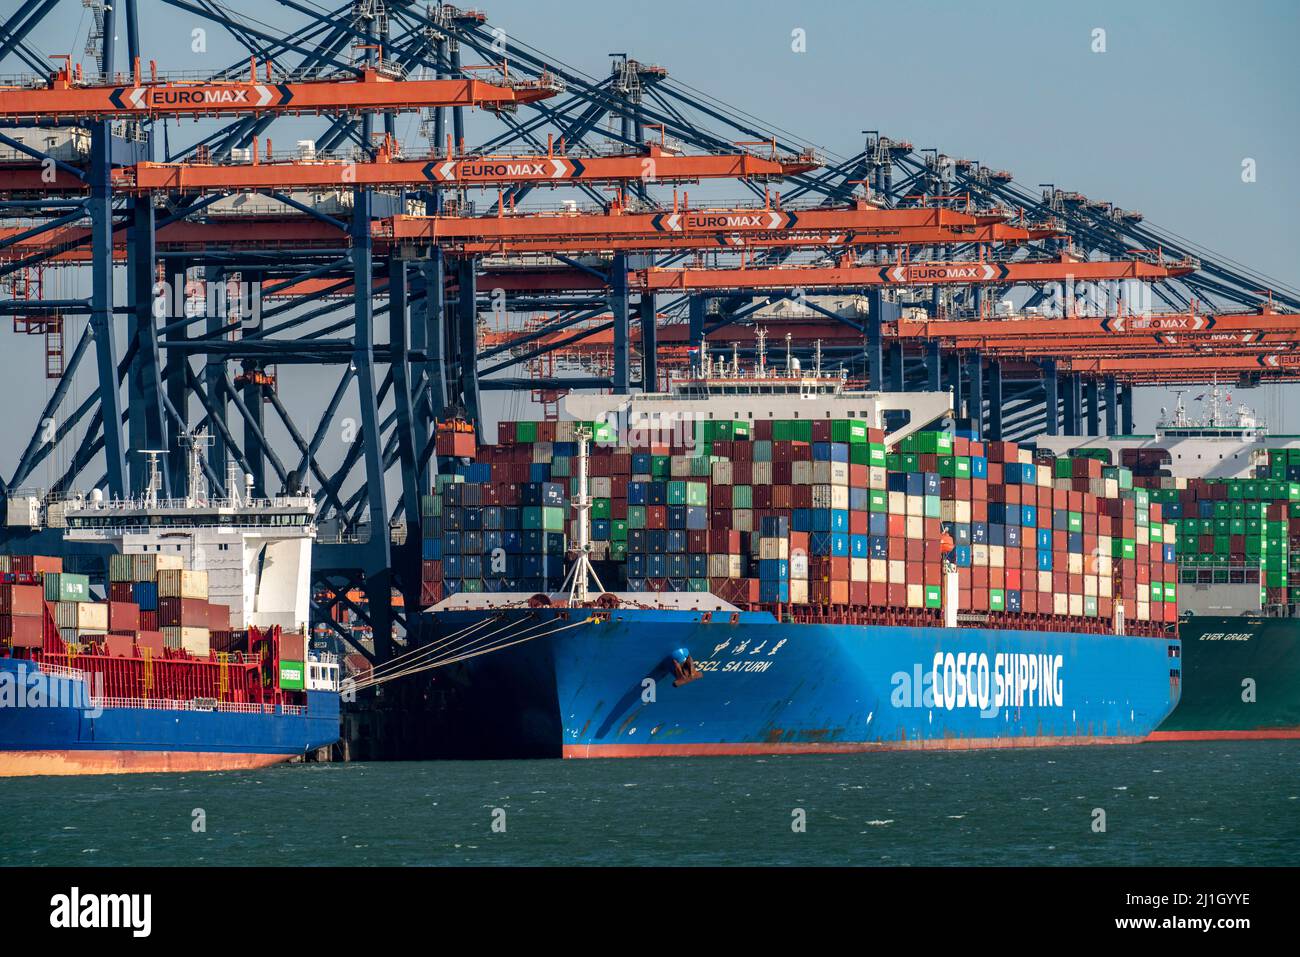 Euromax Container Terminal, container freighters, in the seaport of Rotterdam, Netherlands, deep sea port Maasvlakte 2, on an artificially created lan Stock Photo